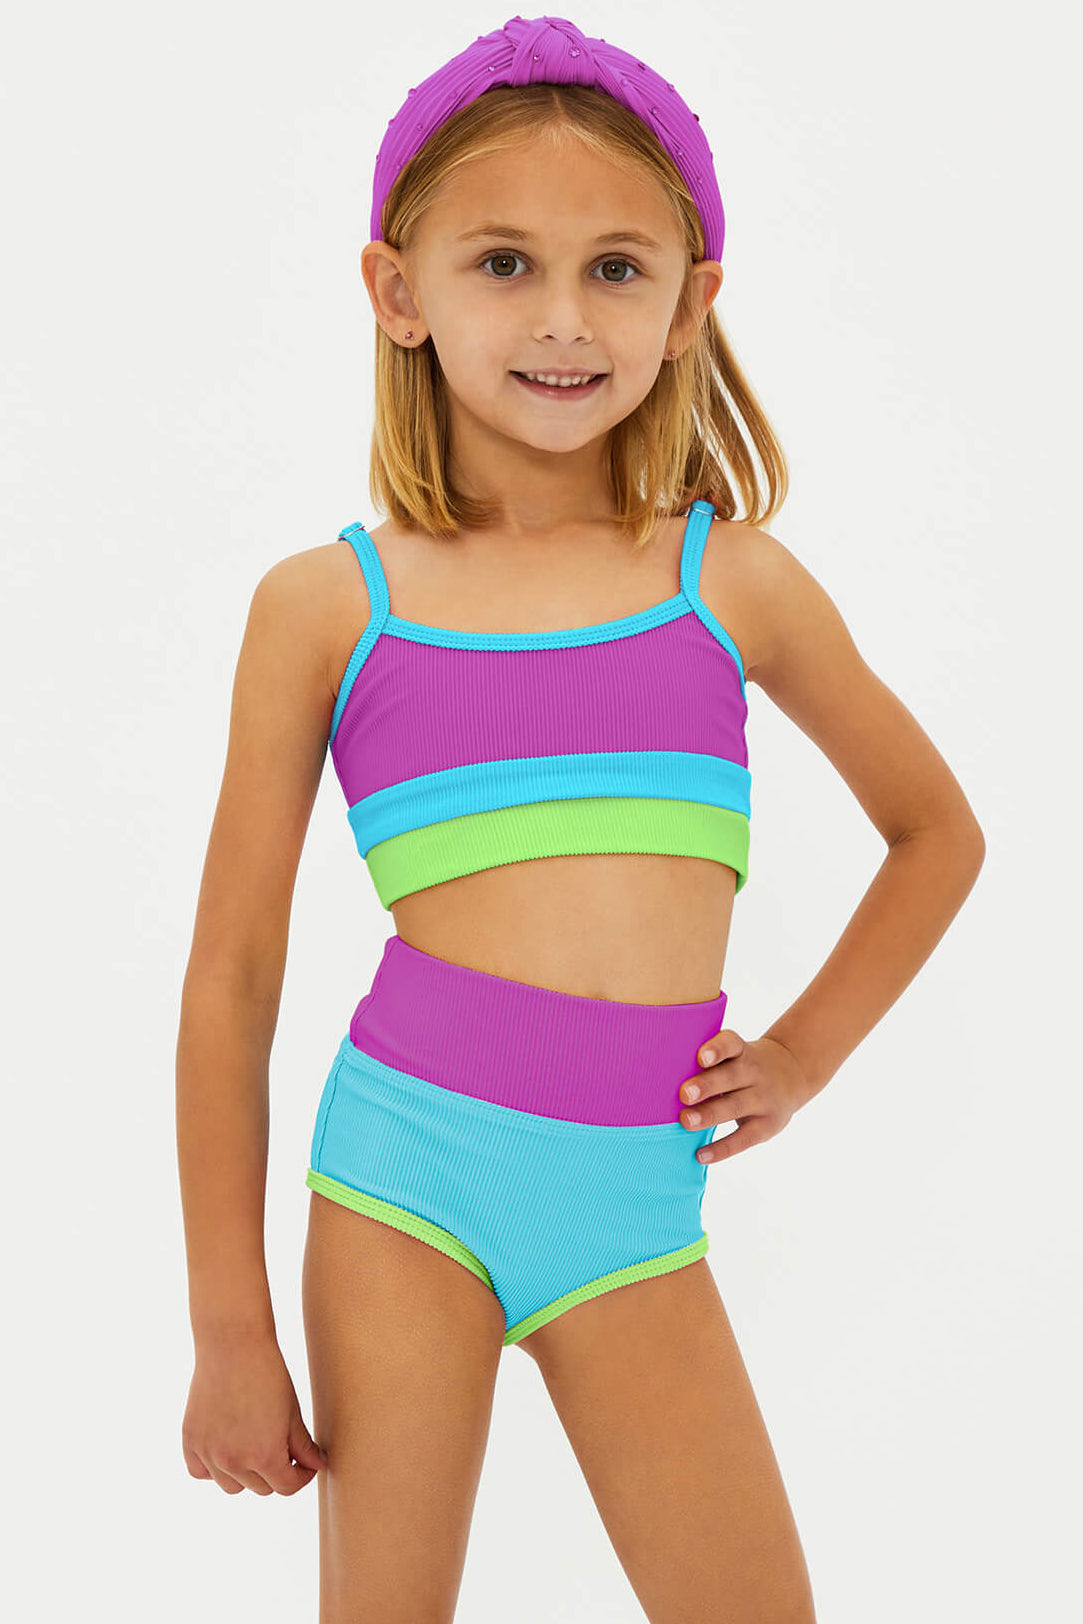 Little Eva Top and Emmie Bottom Cool Fluorescents